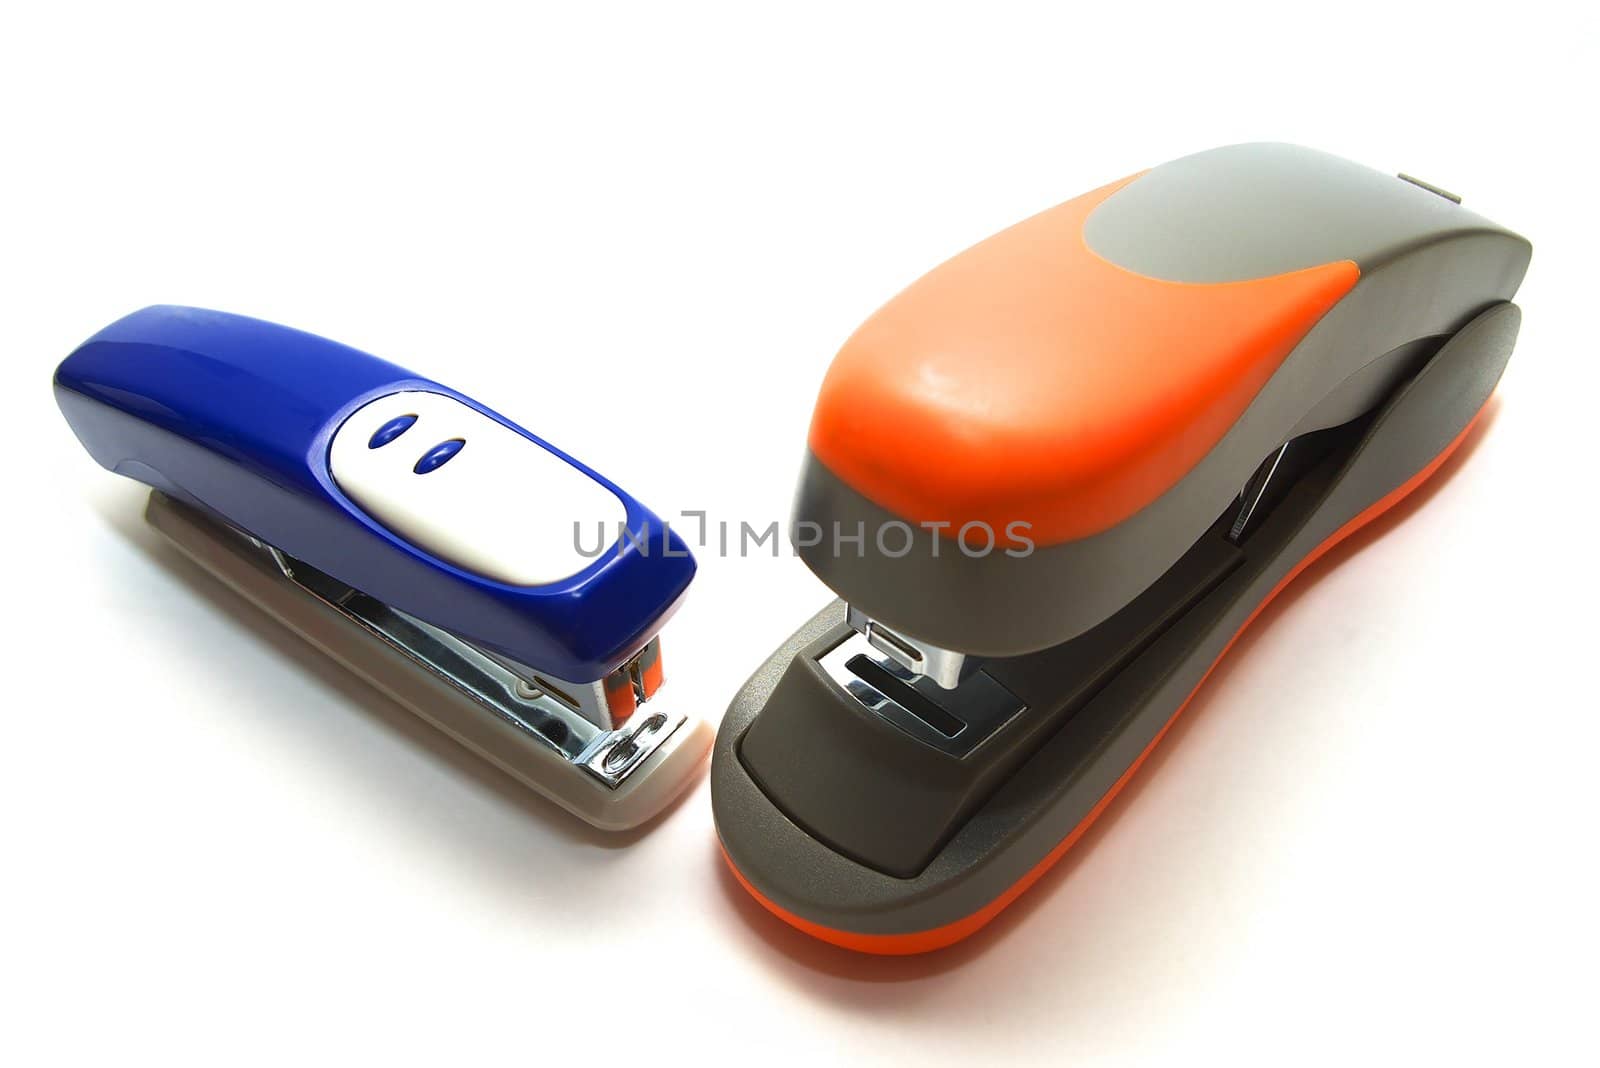 photo of staplers on white background